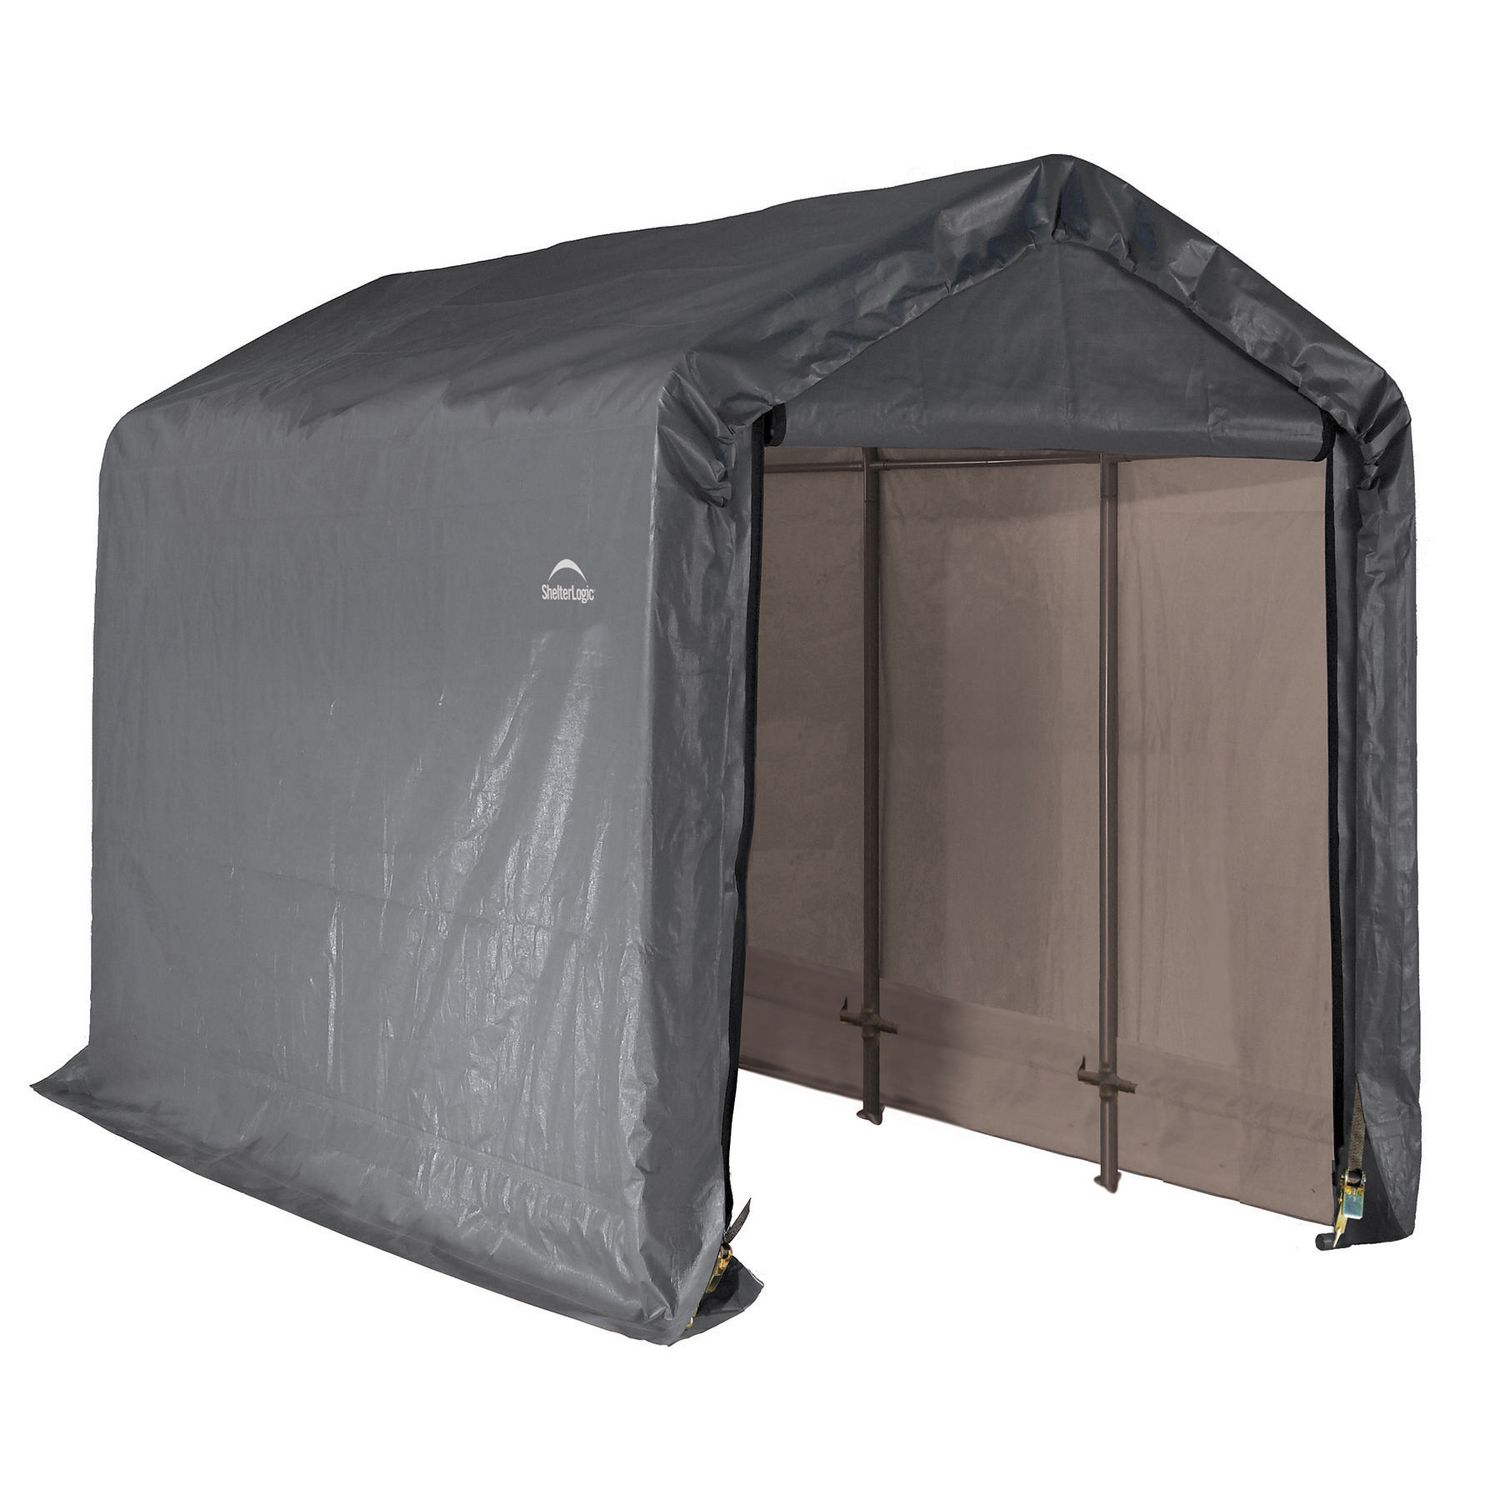 Shed-in-a-Box 6x12x8 ft. Peak Style Storage Shed- Gray